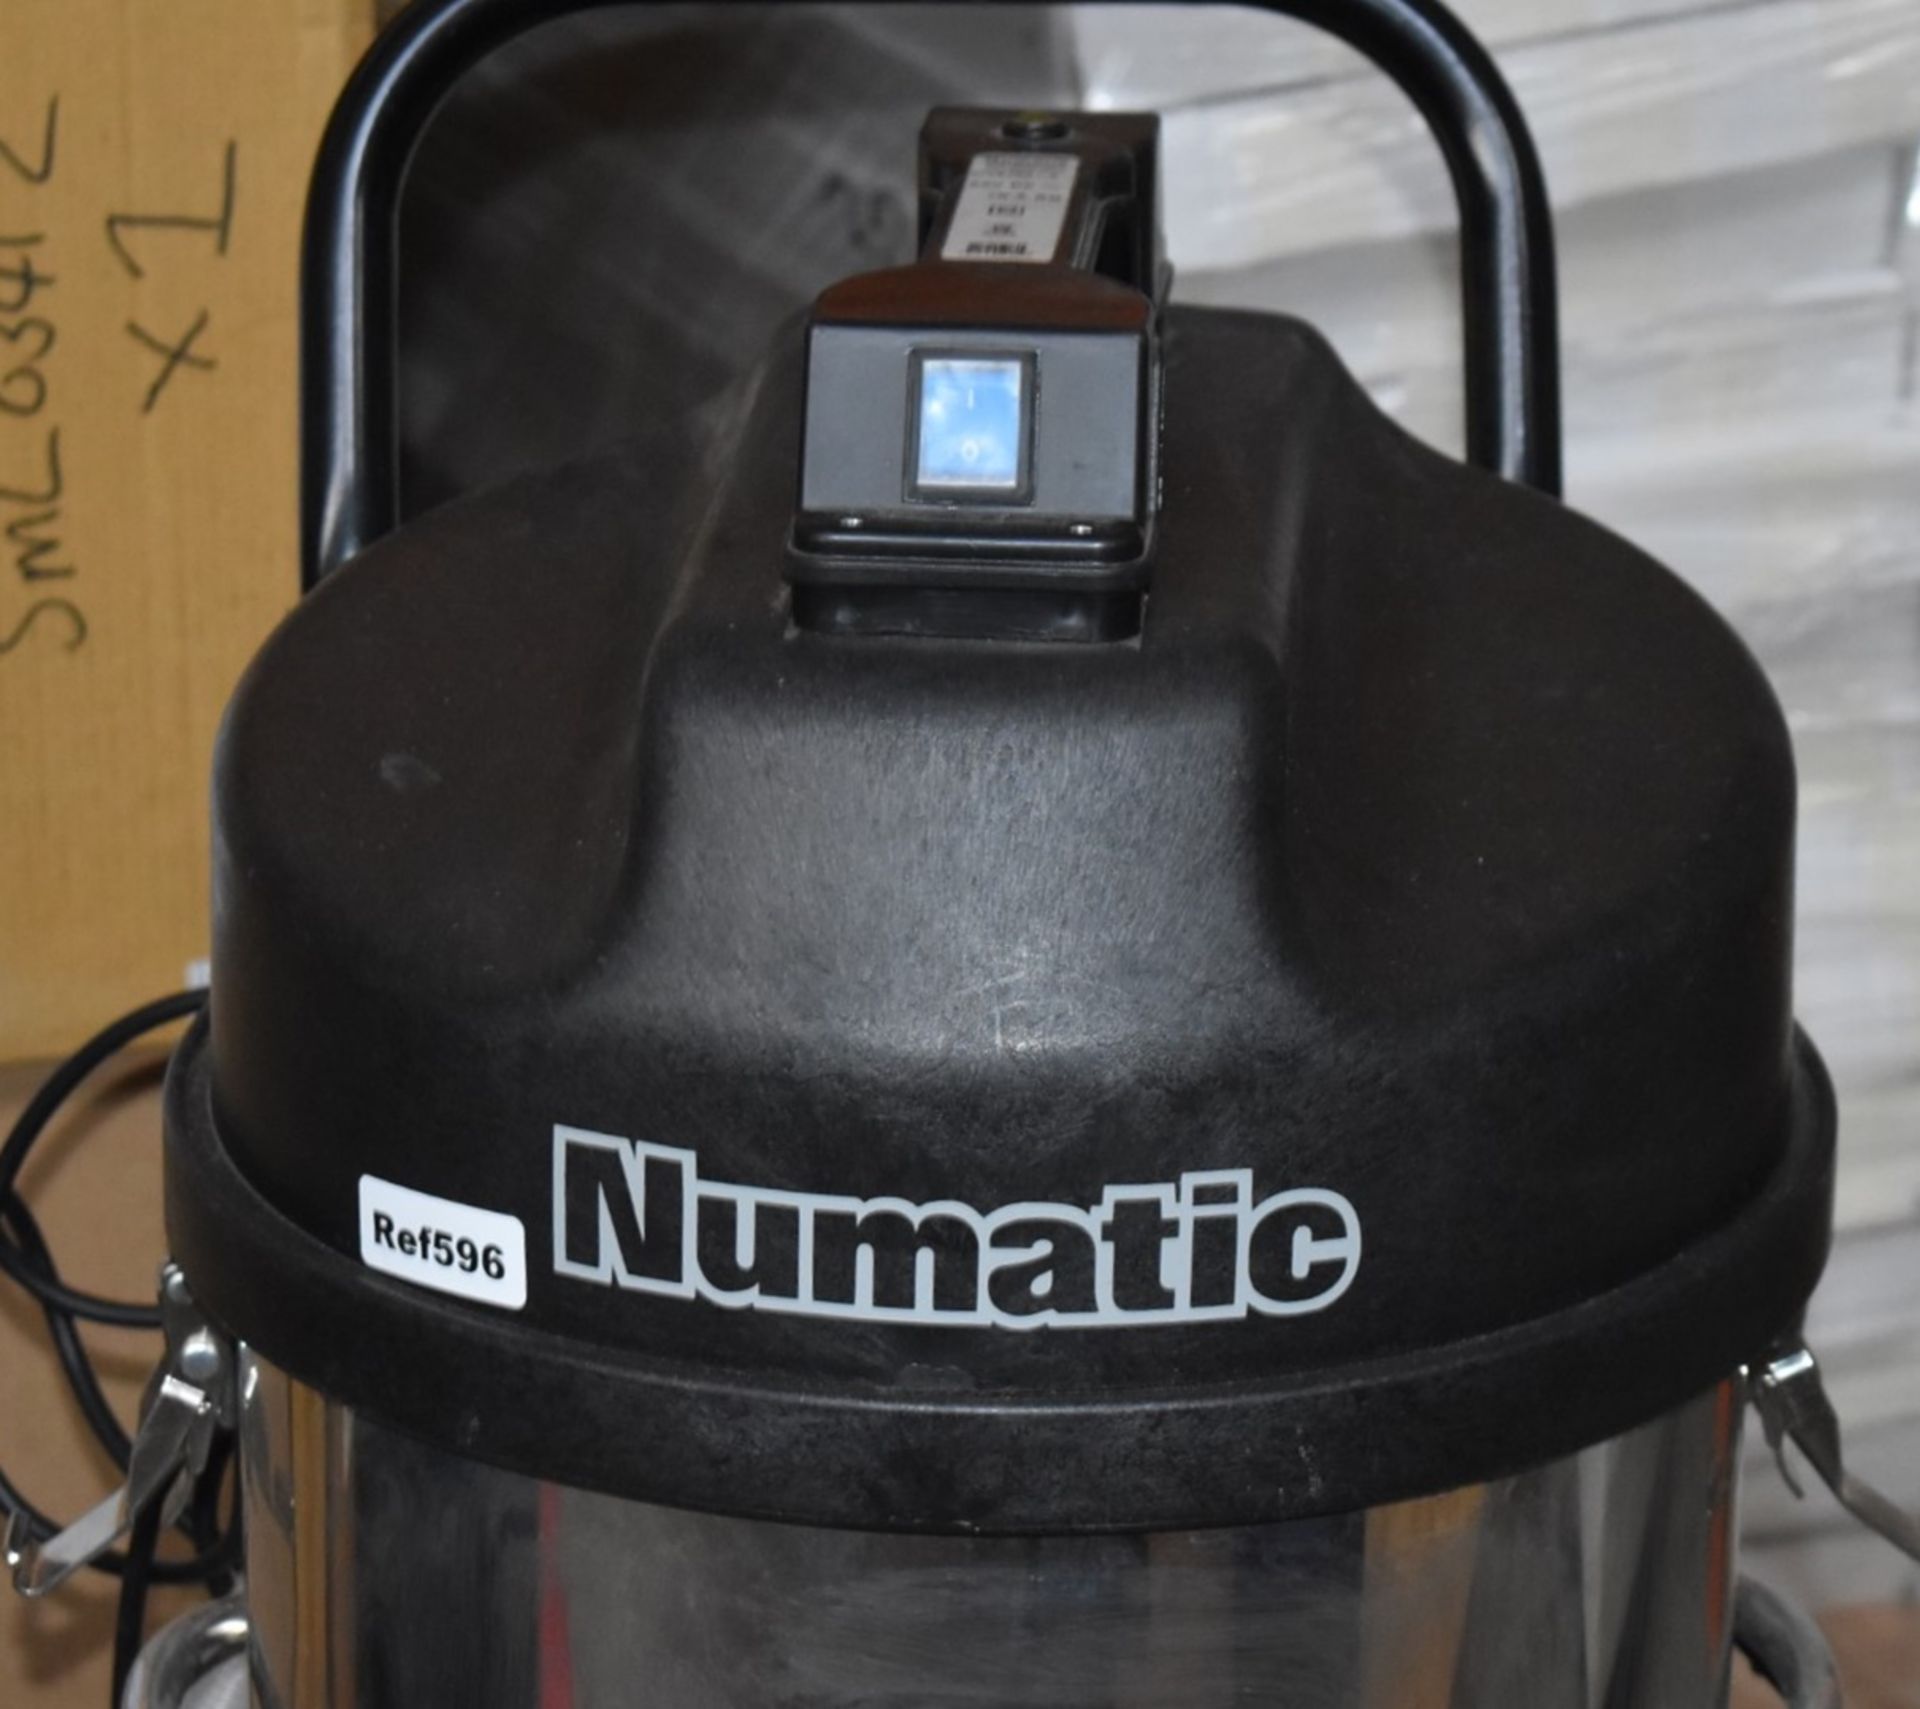 1 x Numatic WVDB750 Battery Powered Wet & Dry Vacuum Cleaner With Stainless Steel Body - Image 7 of 7